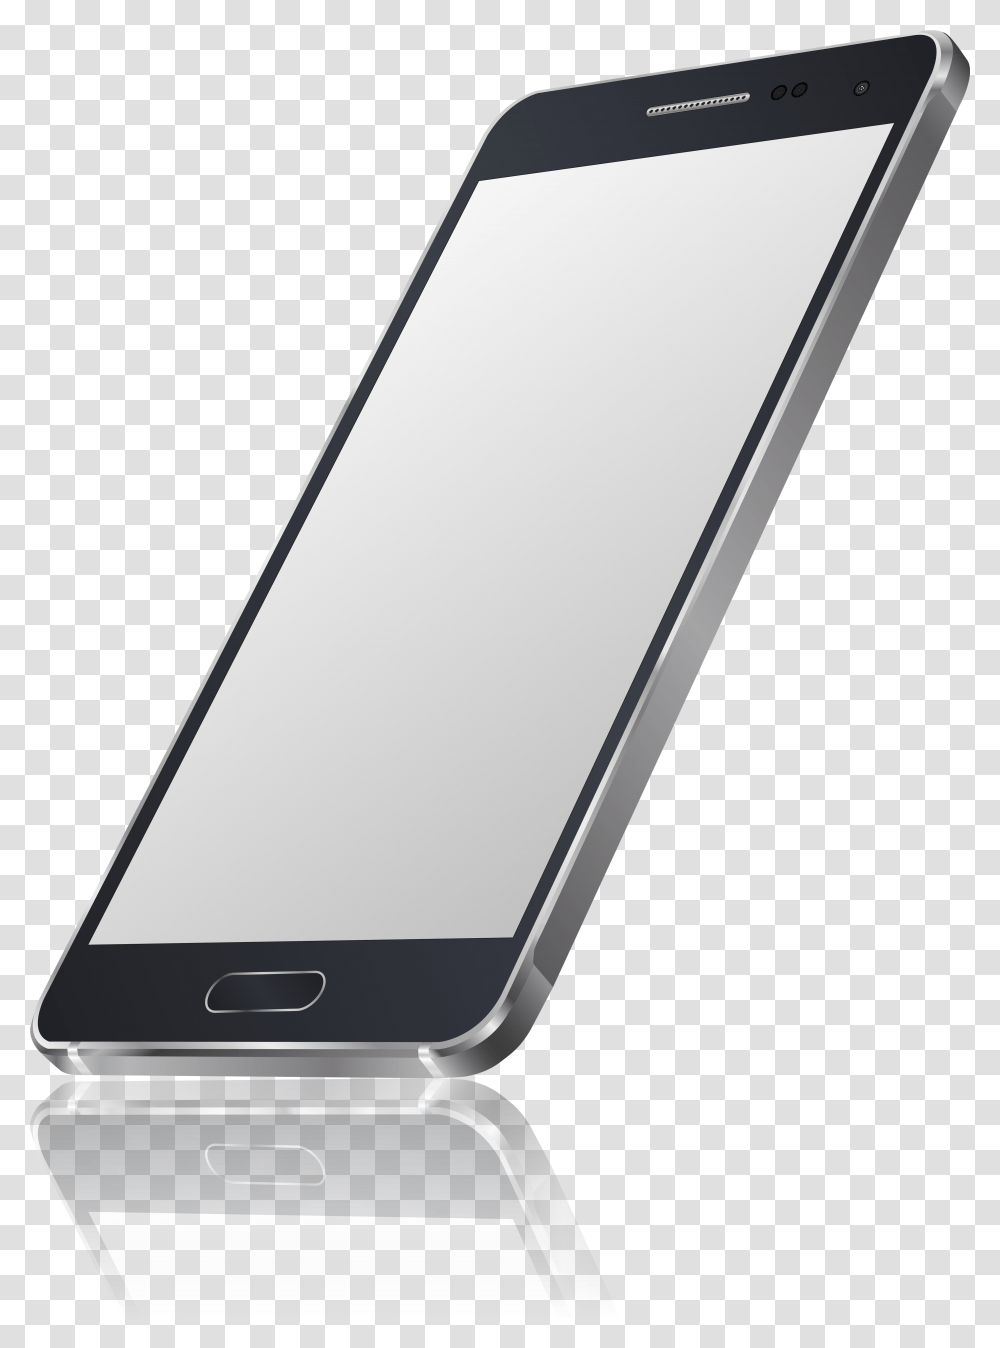 Smartphone Clip Art Image Smartphone, Electronics, Mobile Phone, Cell Phone, Iphone Transparent Png